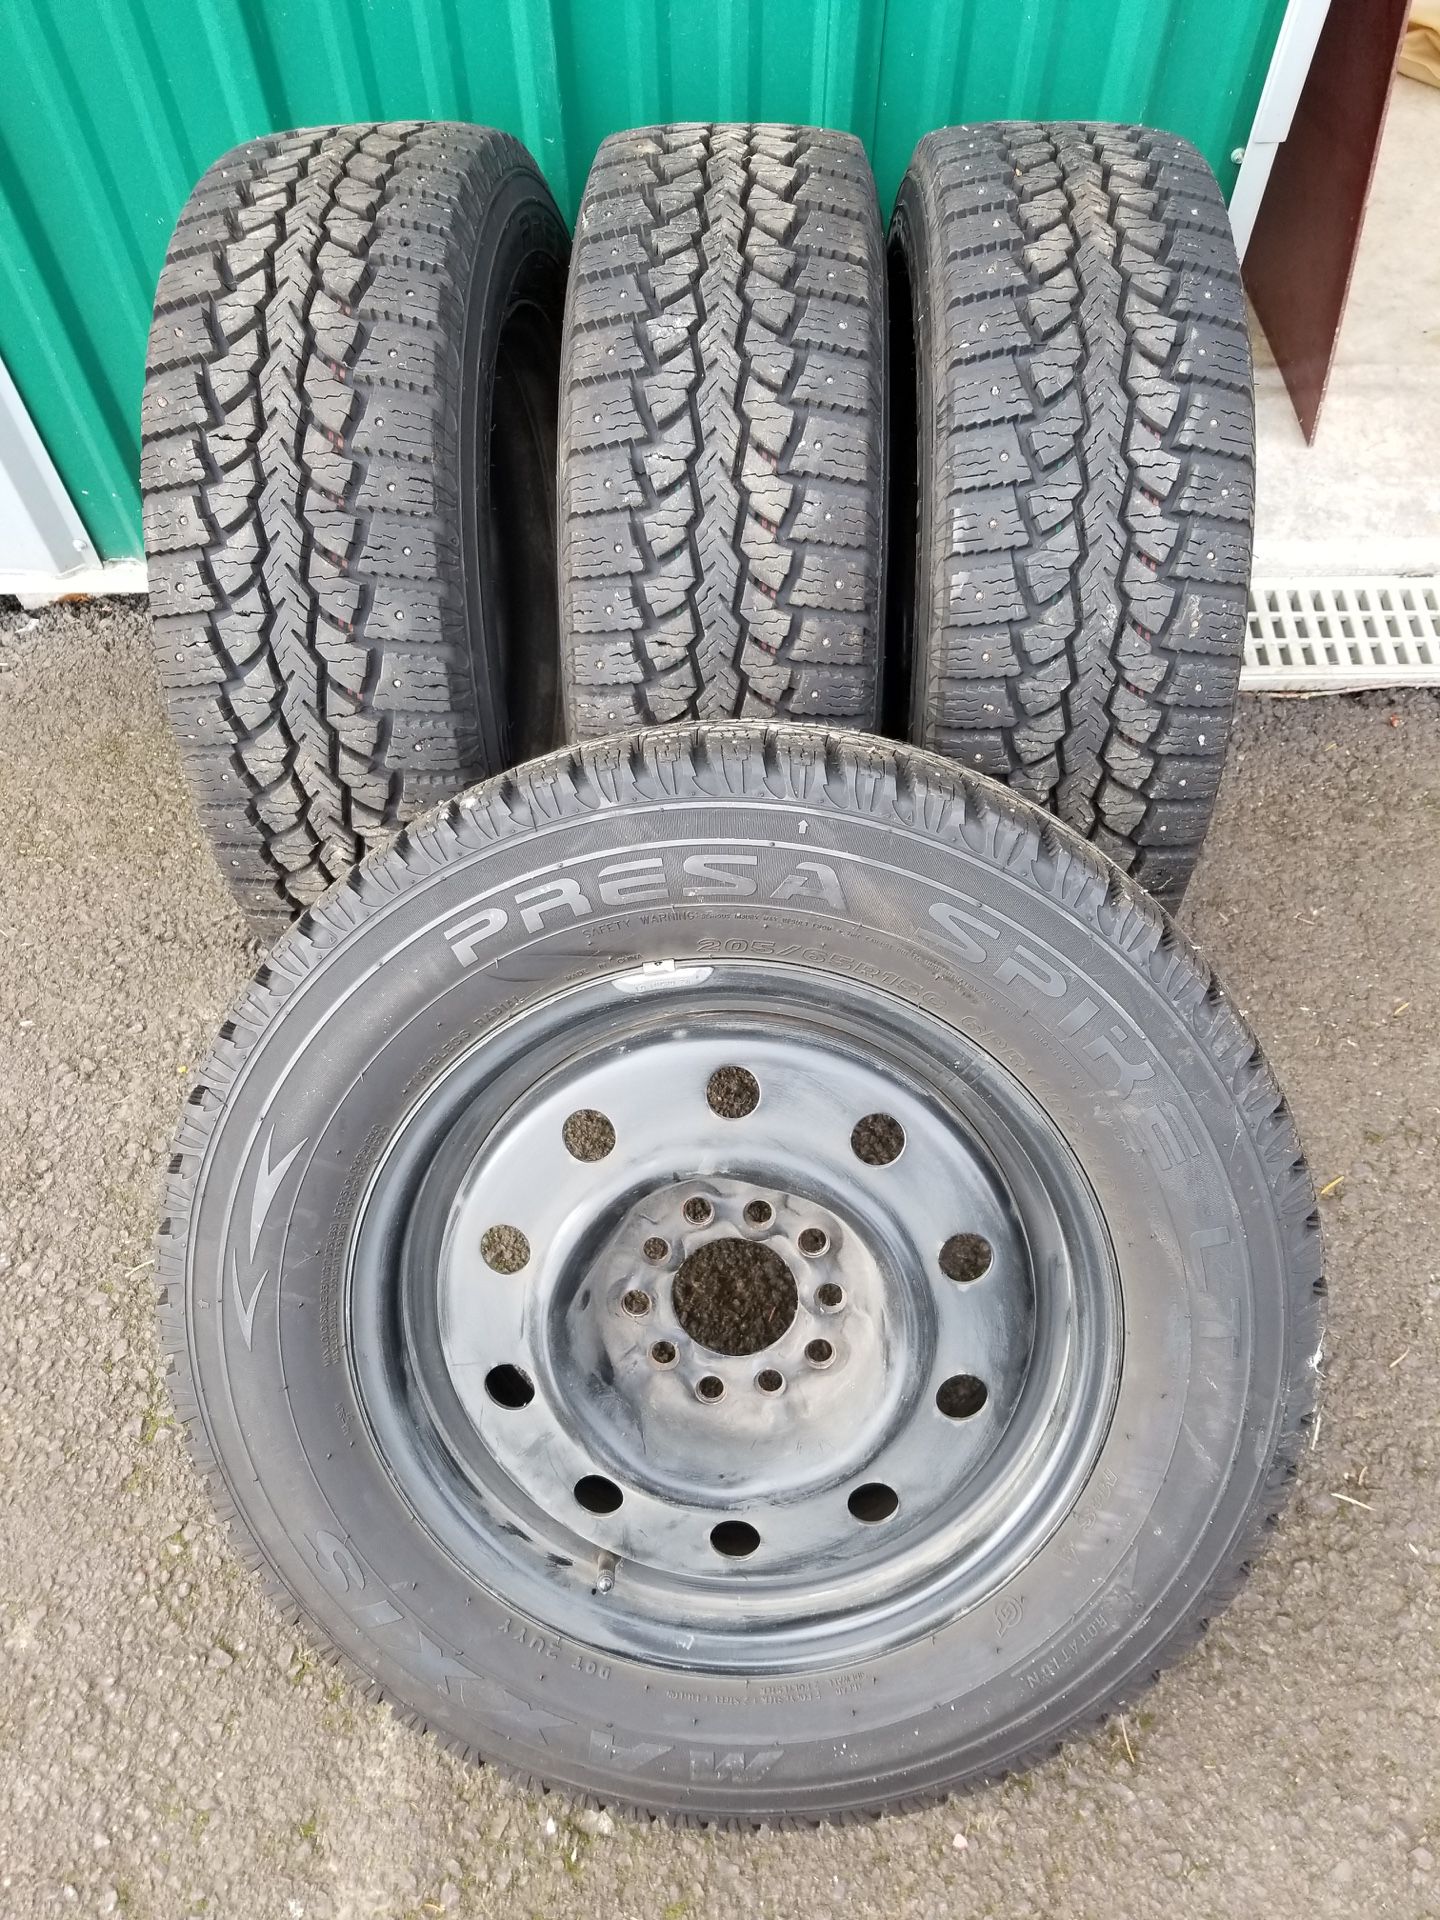 15” Studded Snow Tires, 205 X 65 x 15, Multi Fit Rims, Fit Toyota And Honda, Good Condition, Used On 2003 Accord